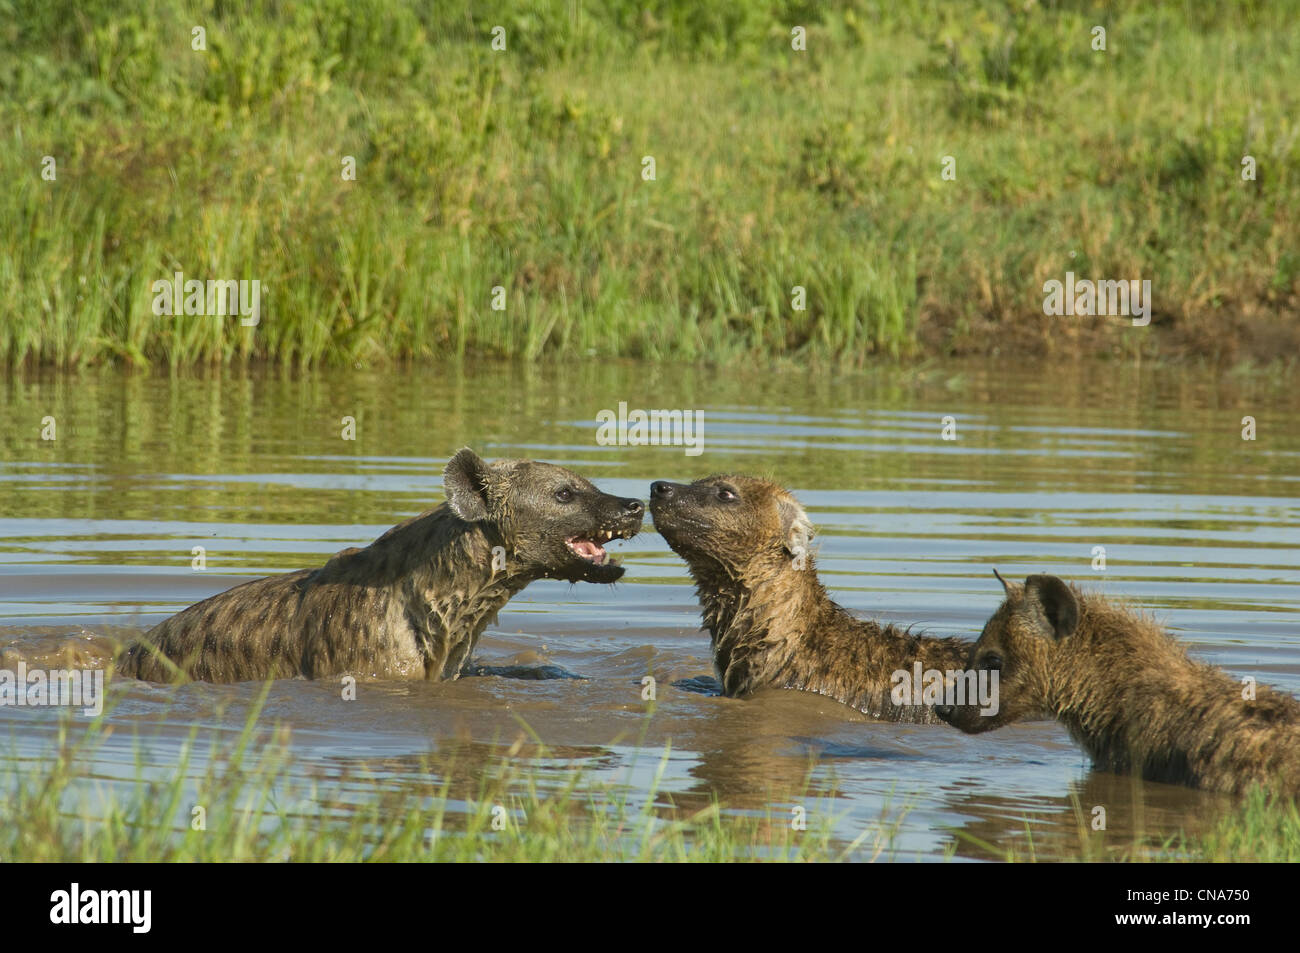 Three Spotted hyenas playing in water Stock Photo